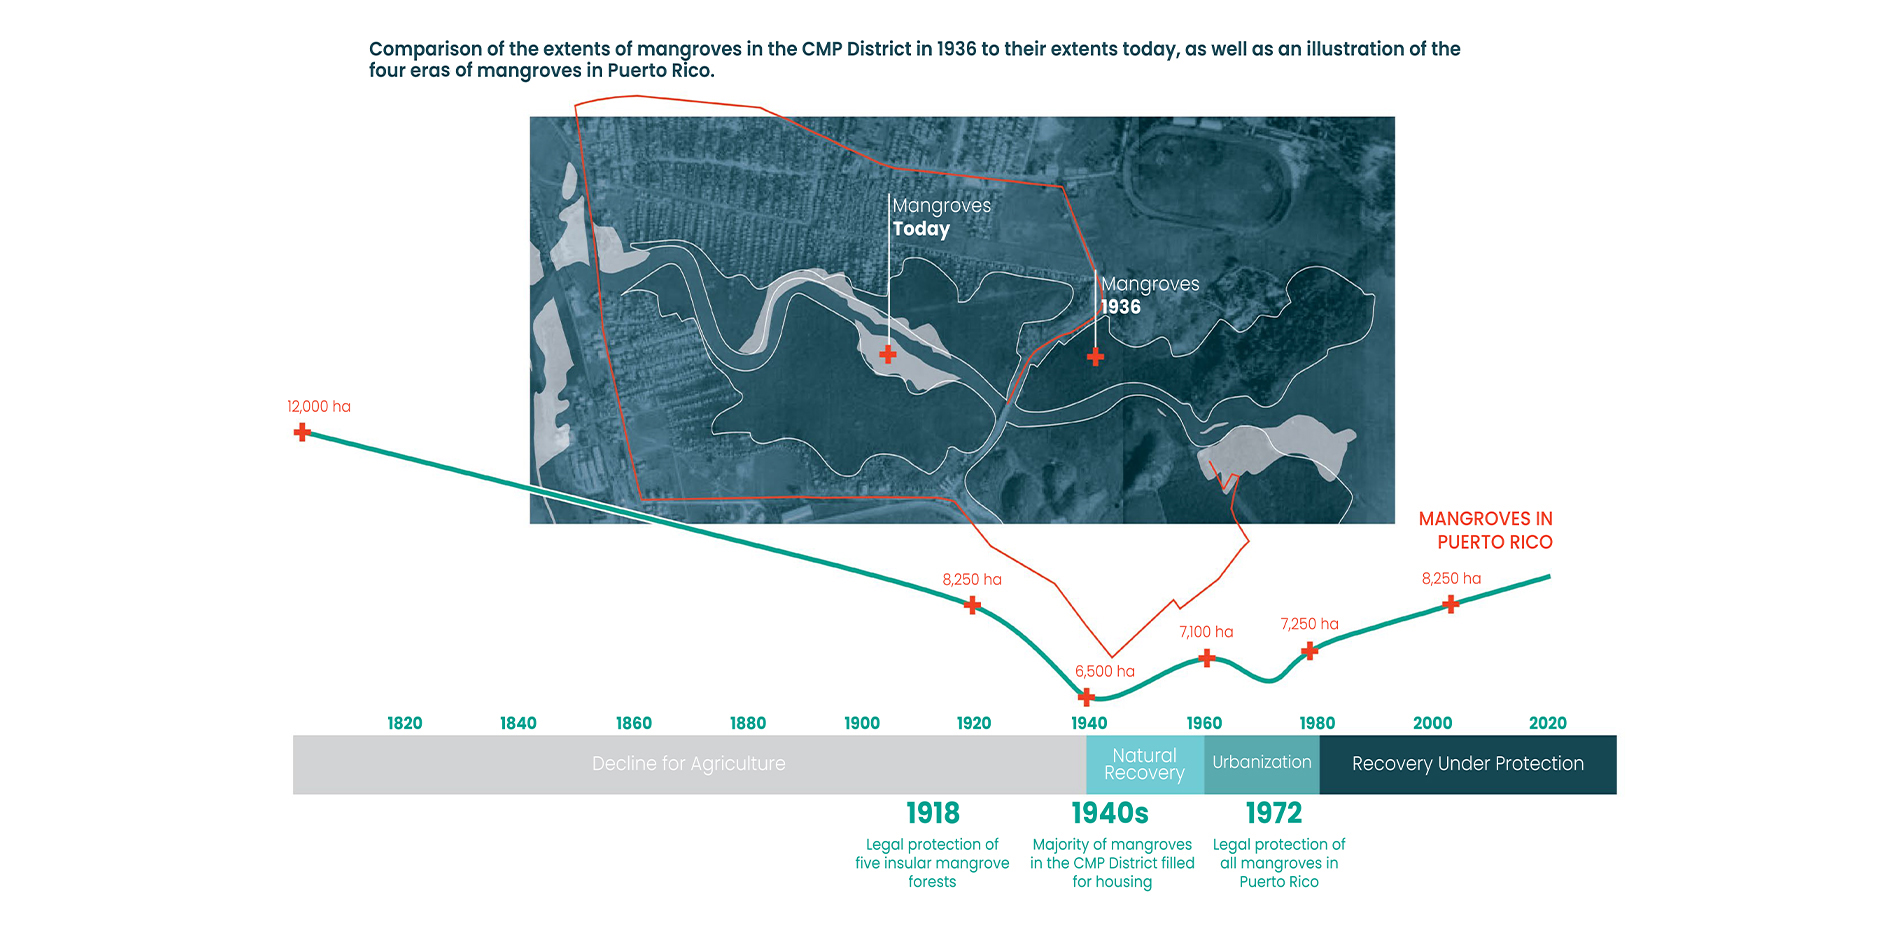 Disappearance of Mangroves in Puerto Rico and the Caño Martín Peña District Over Time